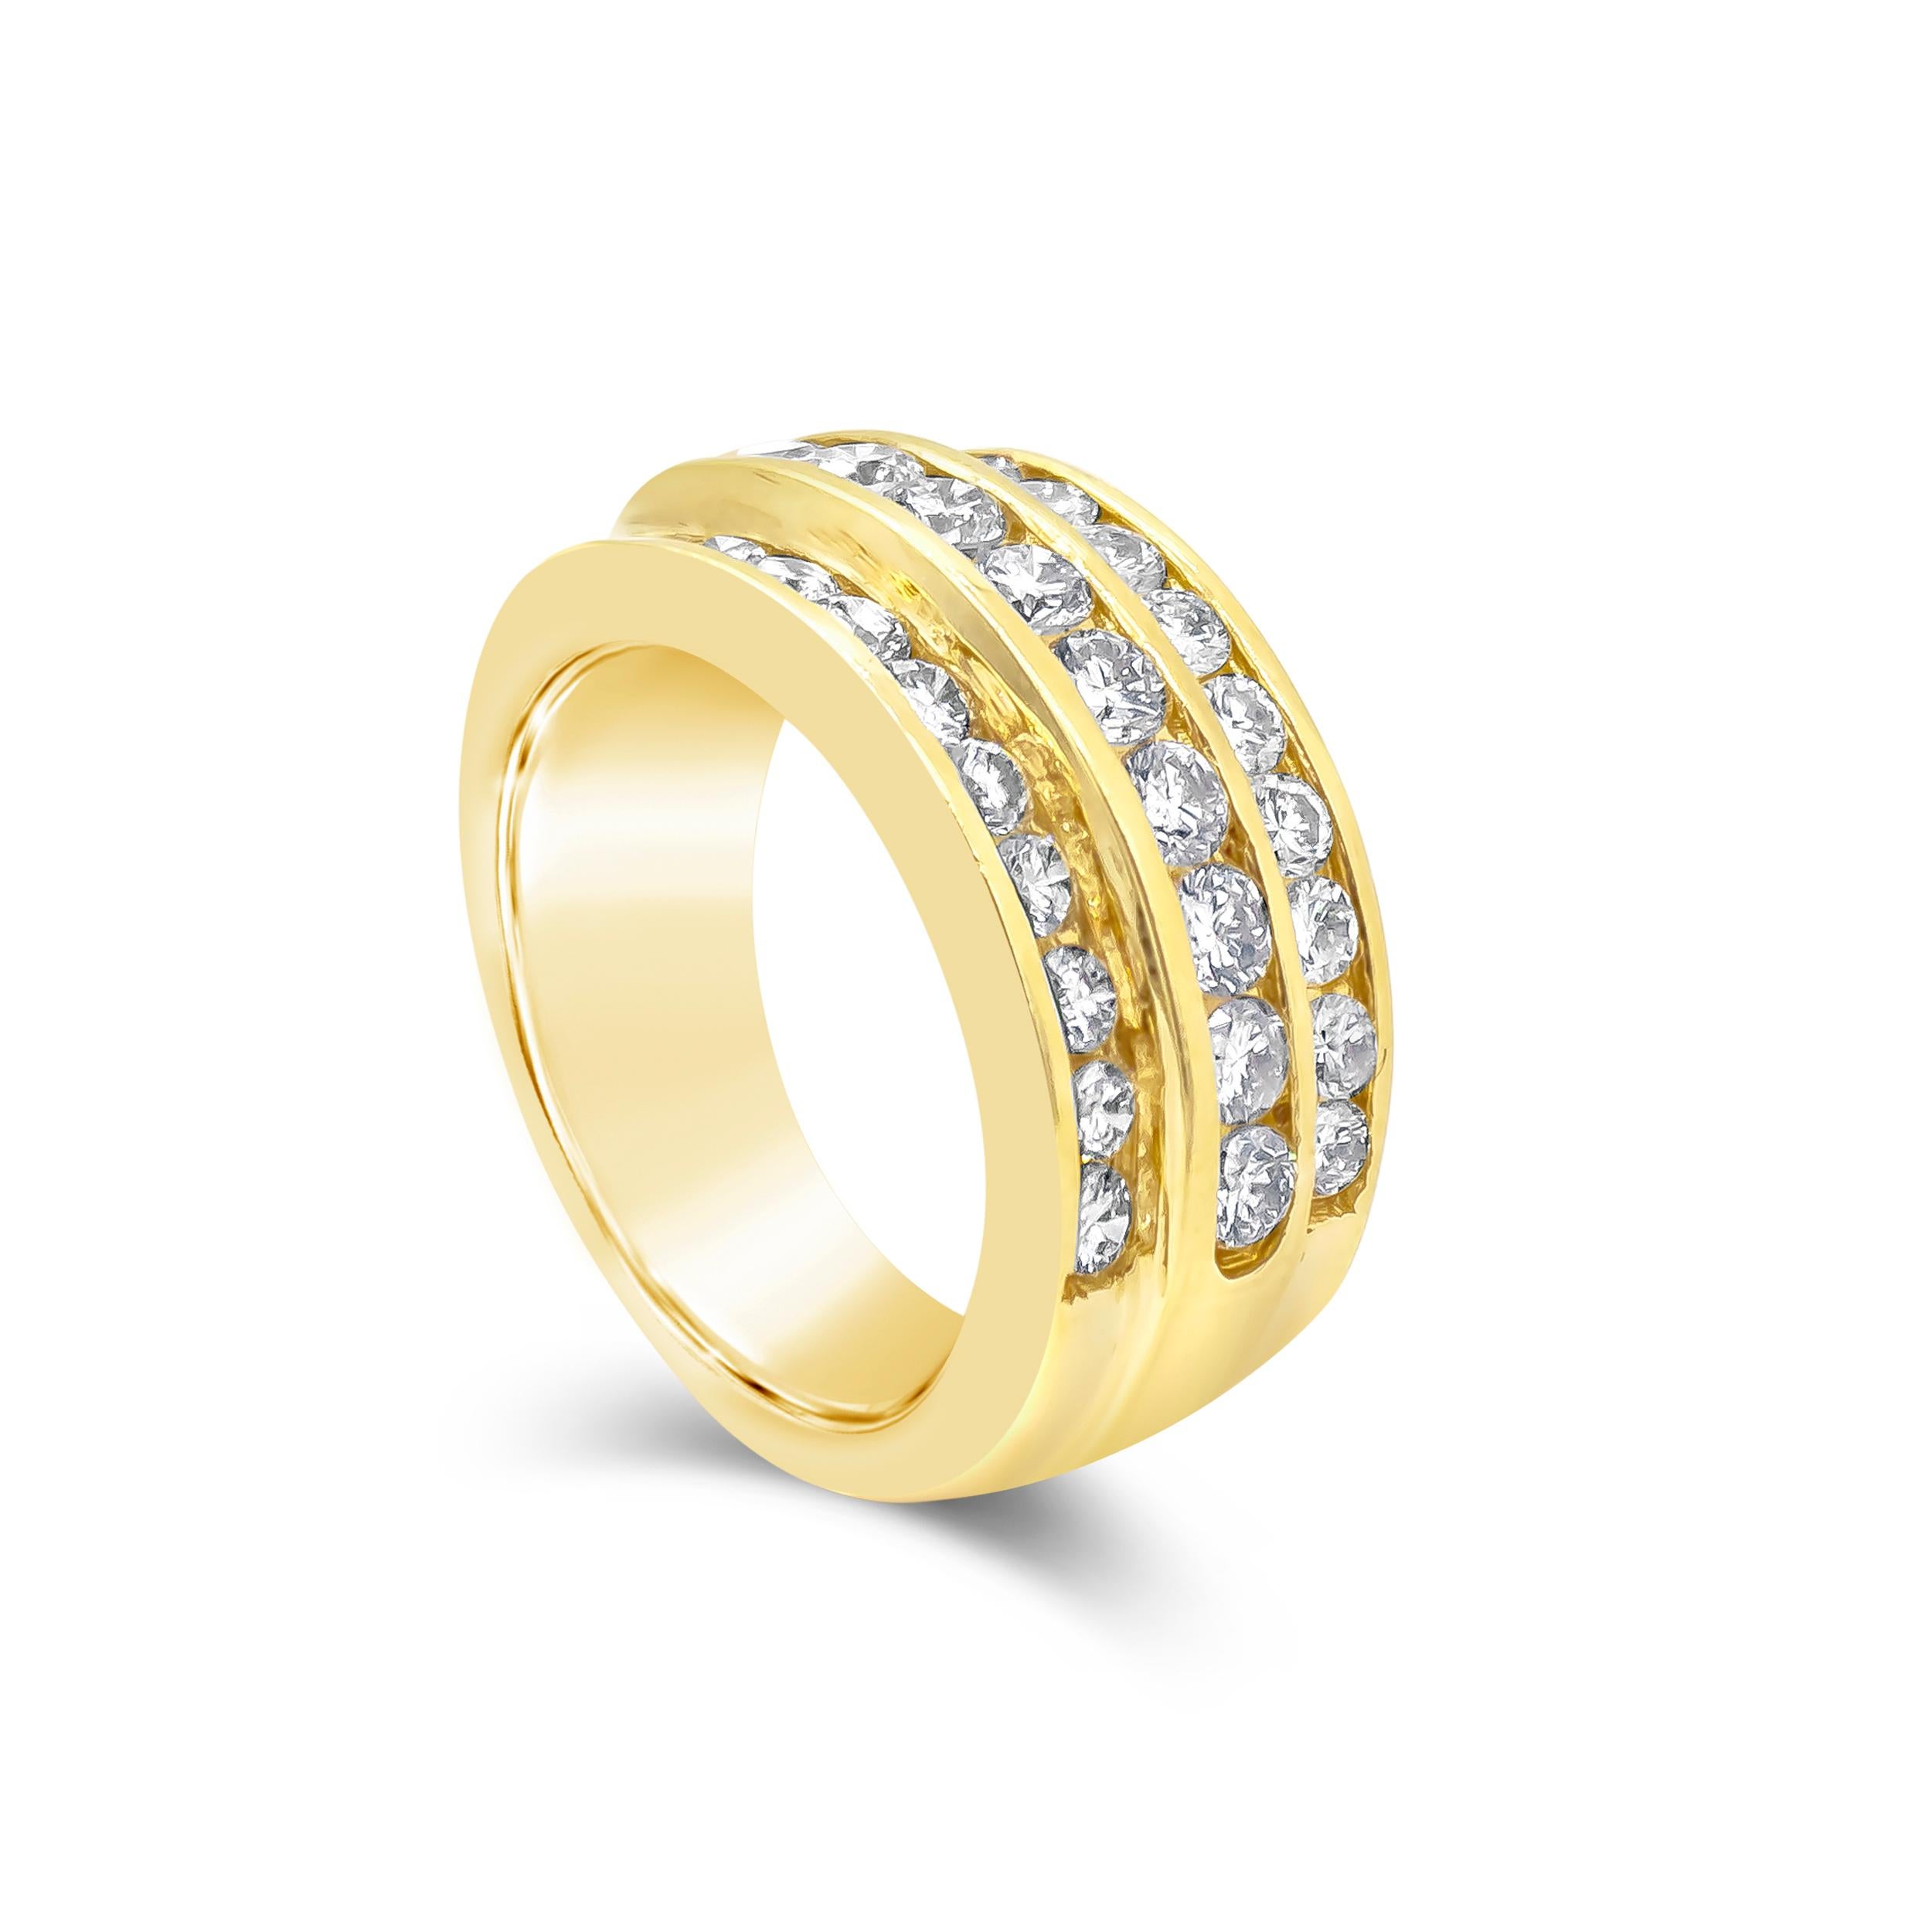 A fashionable wedding band showcasing three rows of 29 brilliant round diamonds stacked and set half-way. Diamonds weigh 2.05 carat. Made with 14K Yellow Gold. Size 7.5 US.

Roman Malakov is a custom house, specializing in creating anything you can